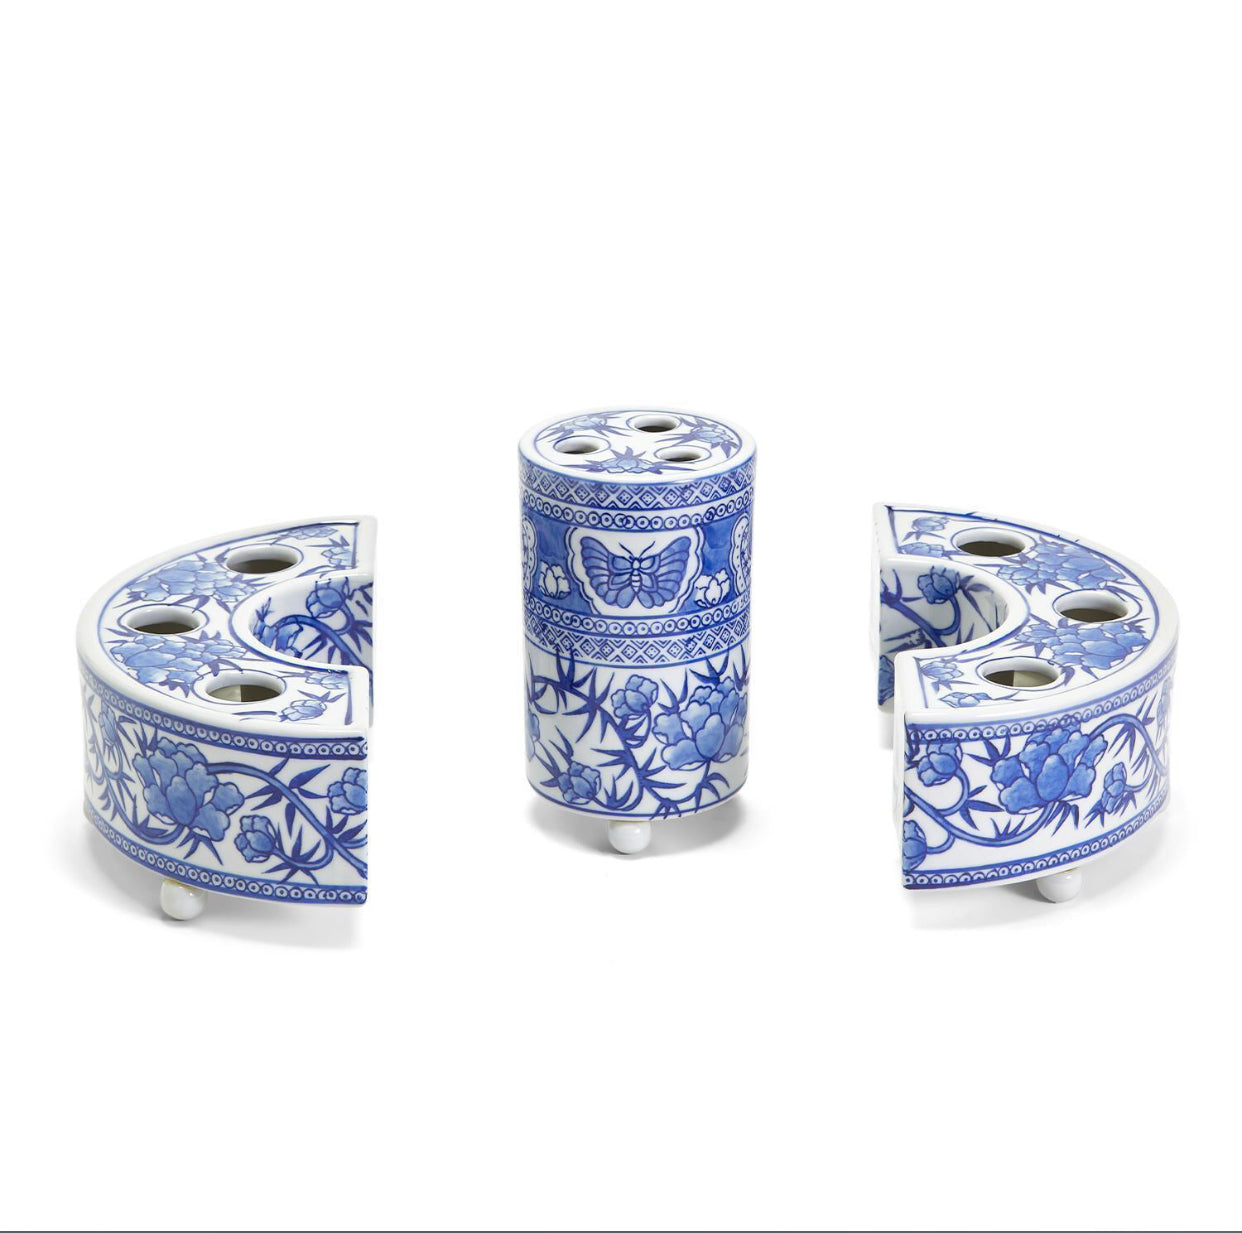 Two's Company - Blue And White Hand Painted Floral Arranger